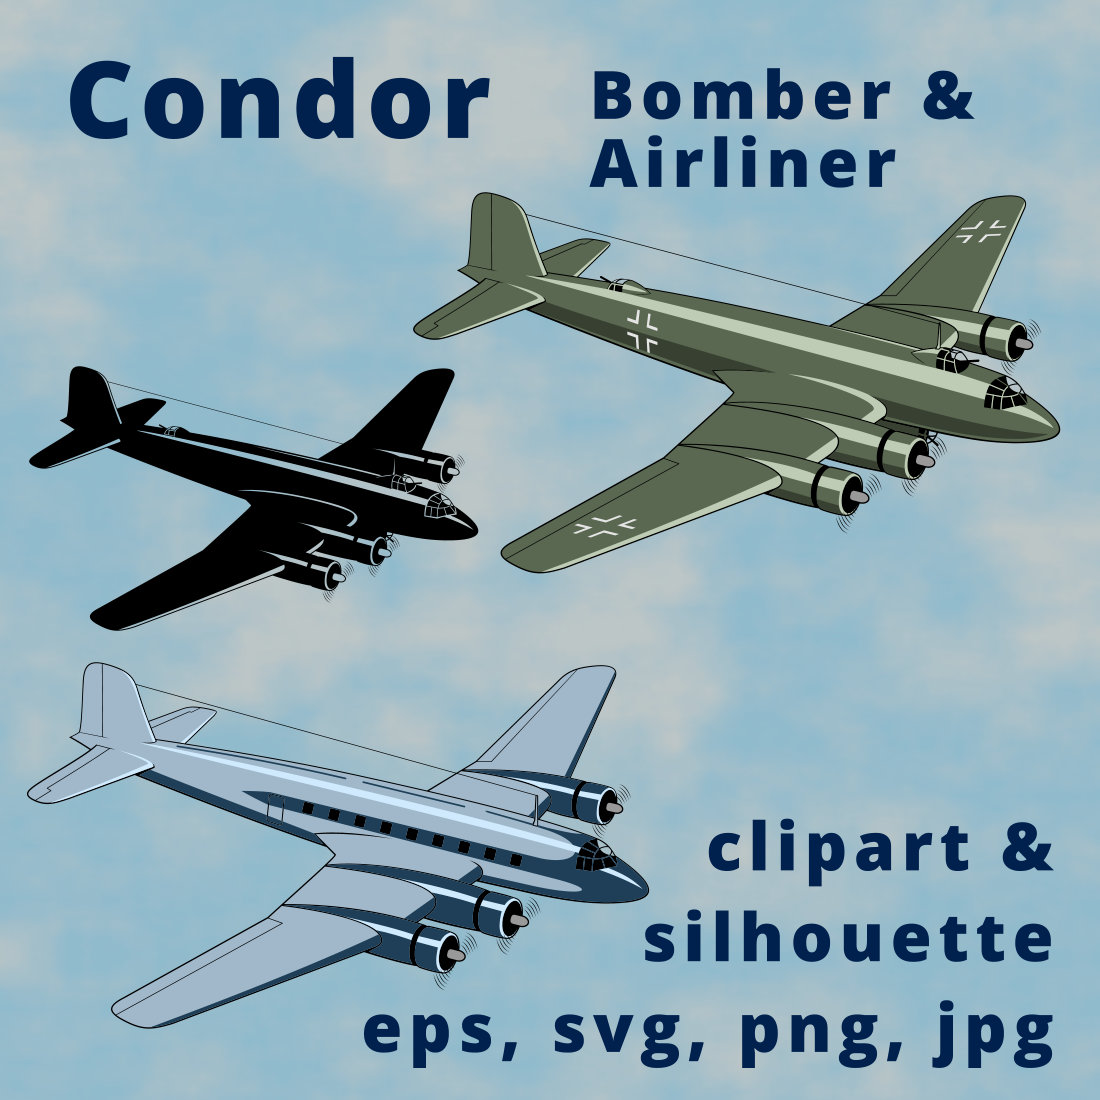 Fw-200 Condor German Bomber Clipart cover image.